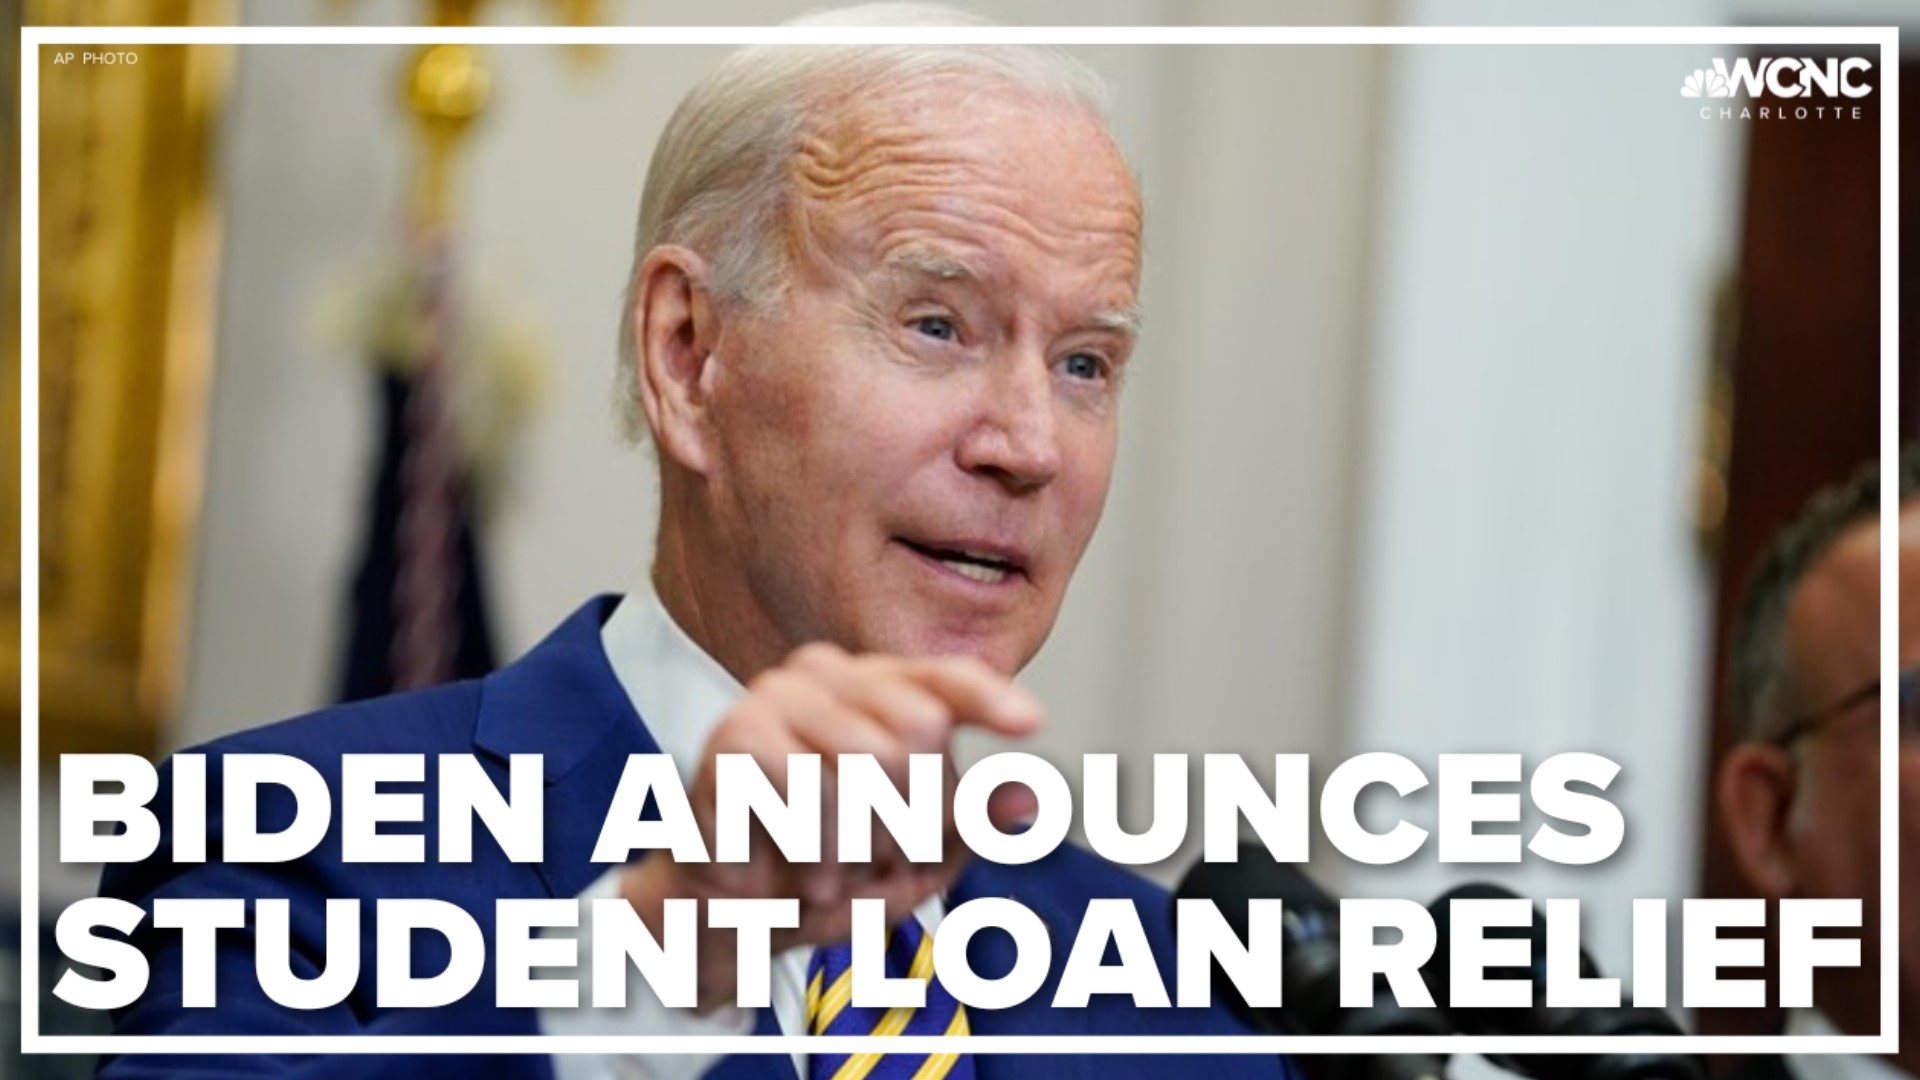 Borrowers who earn less than $125,000 a year, or families earning less than $250,000, would be eligible for the $10,000 loan forgiveness, Biden announced.